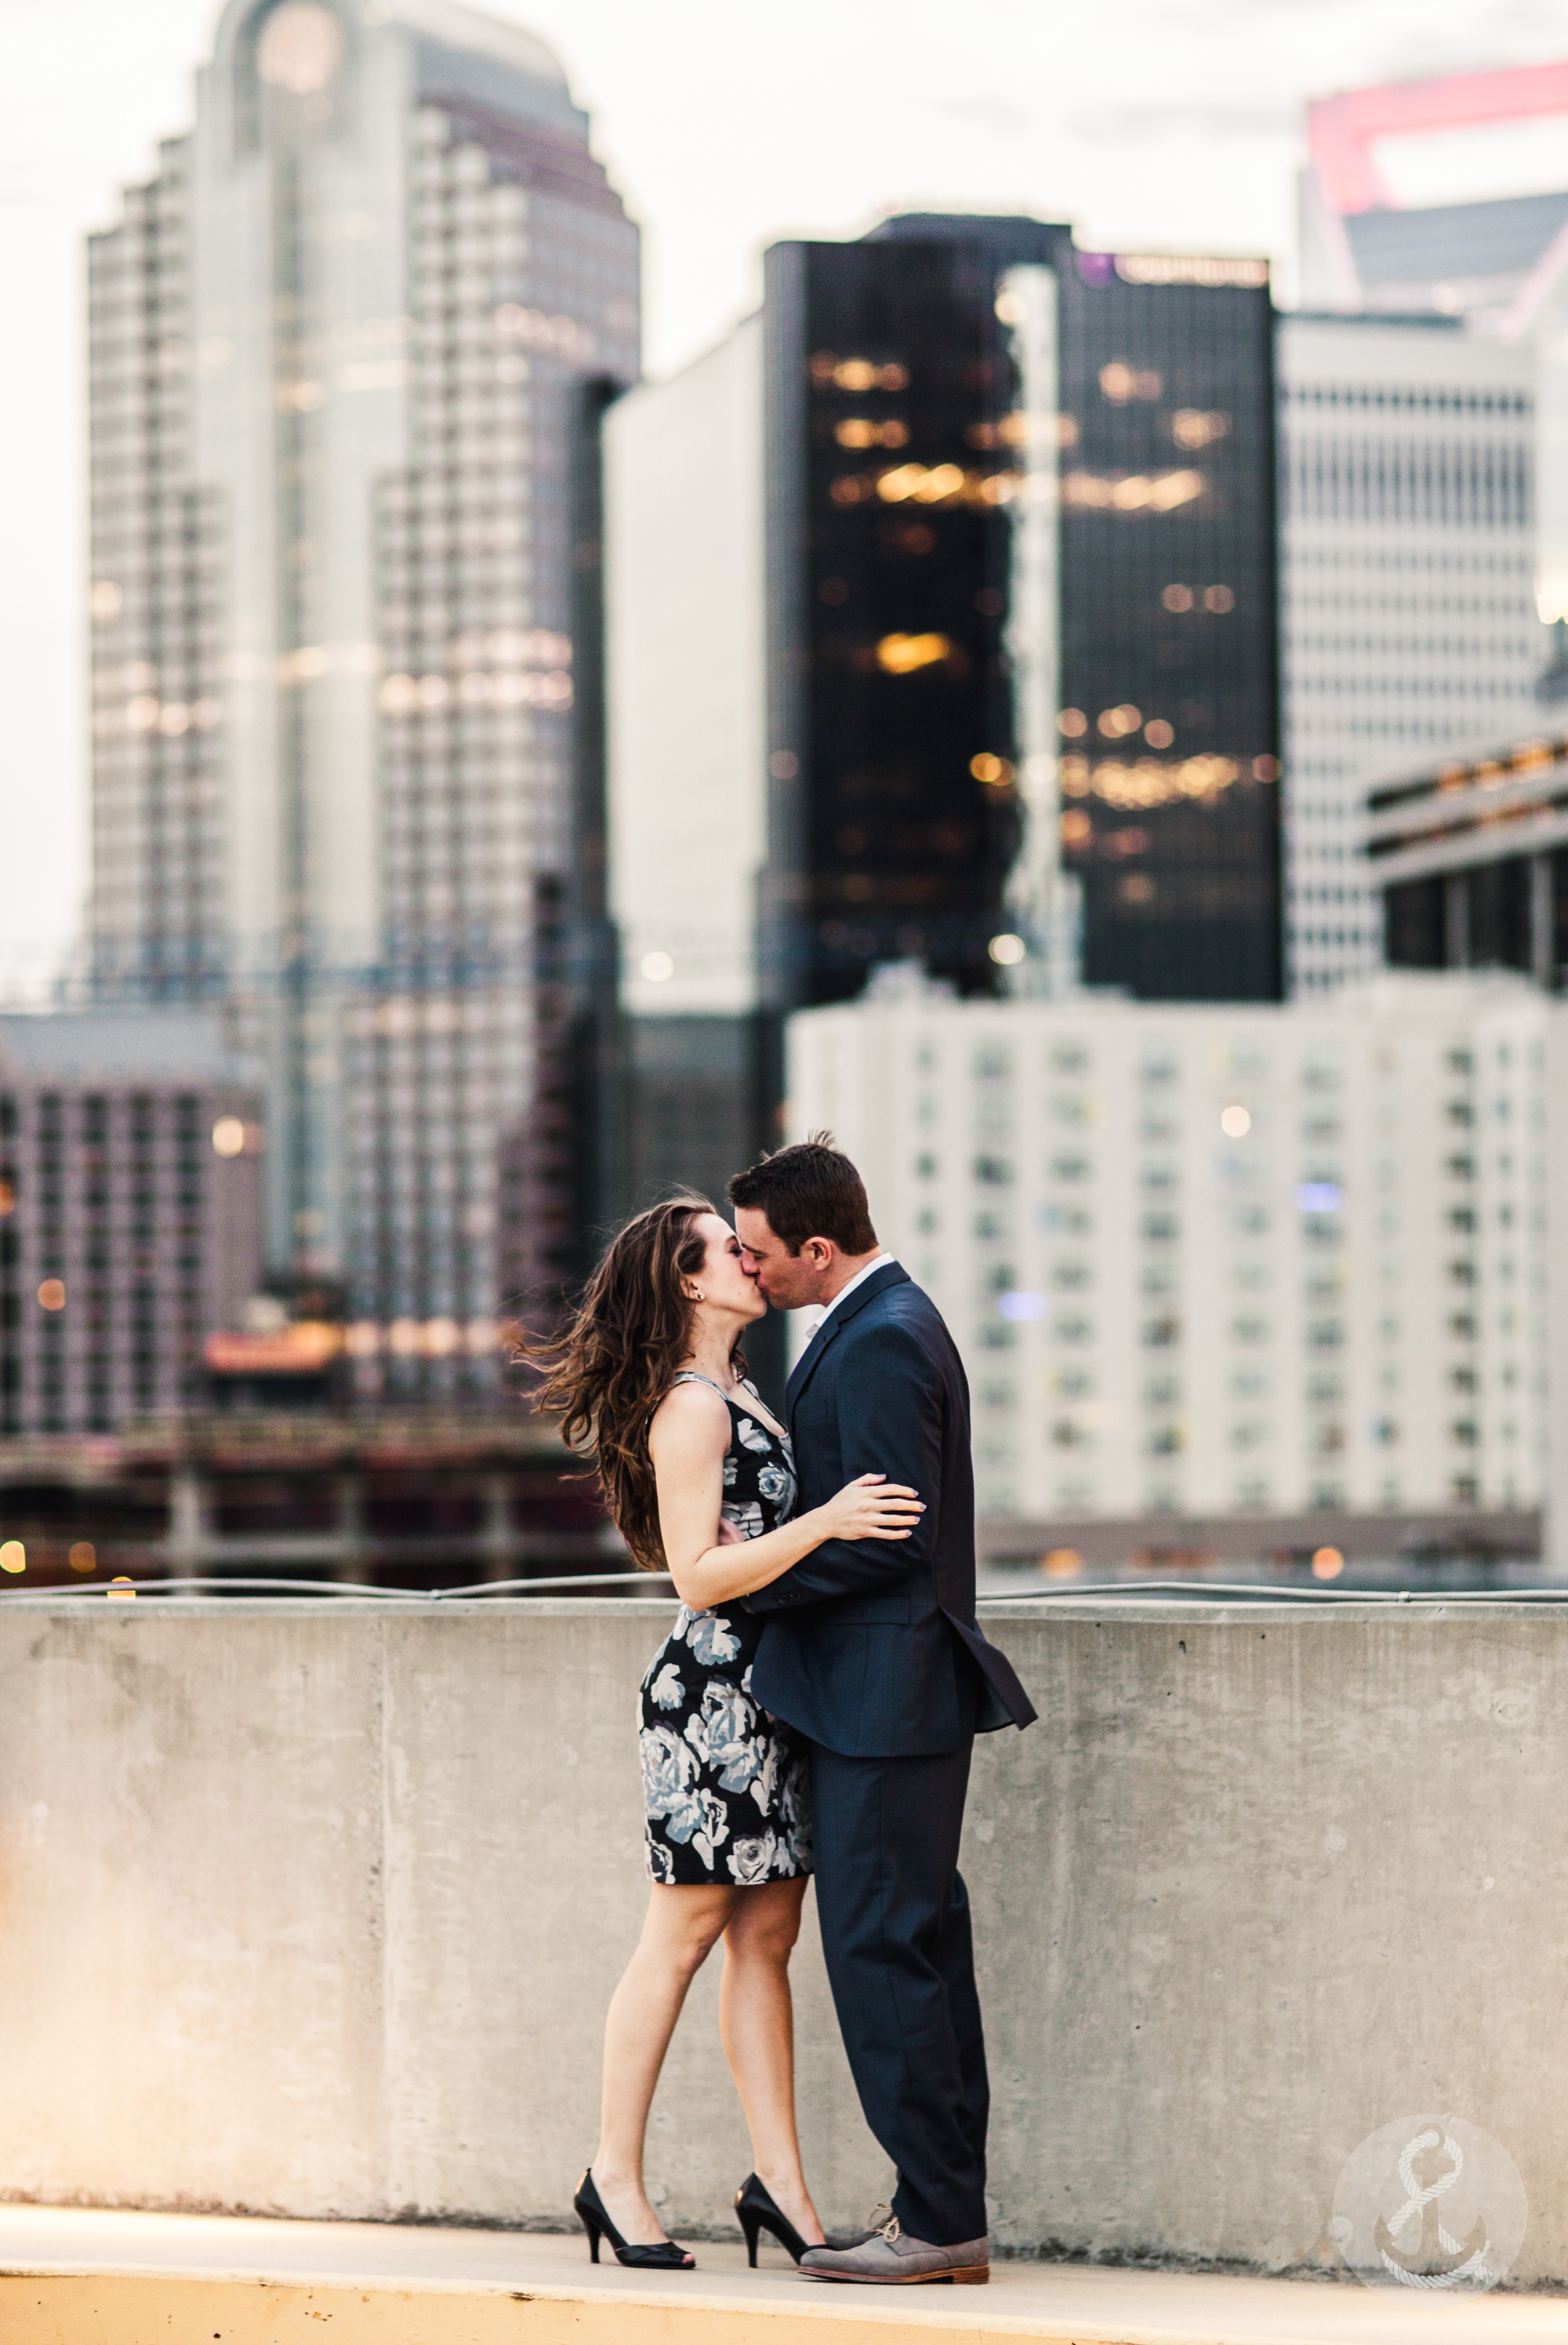 Uptown Charlotte Engagement Session 2